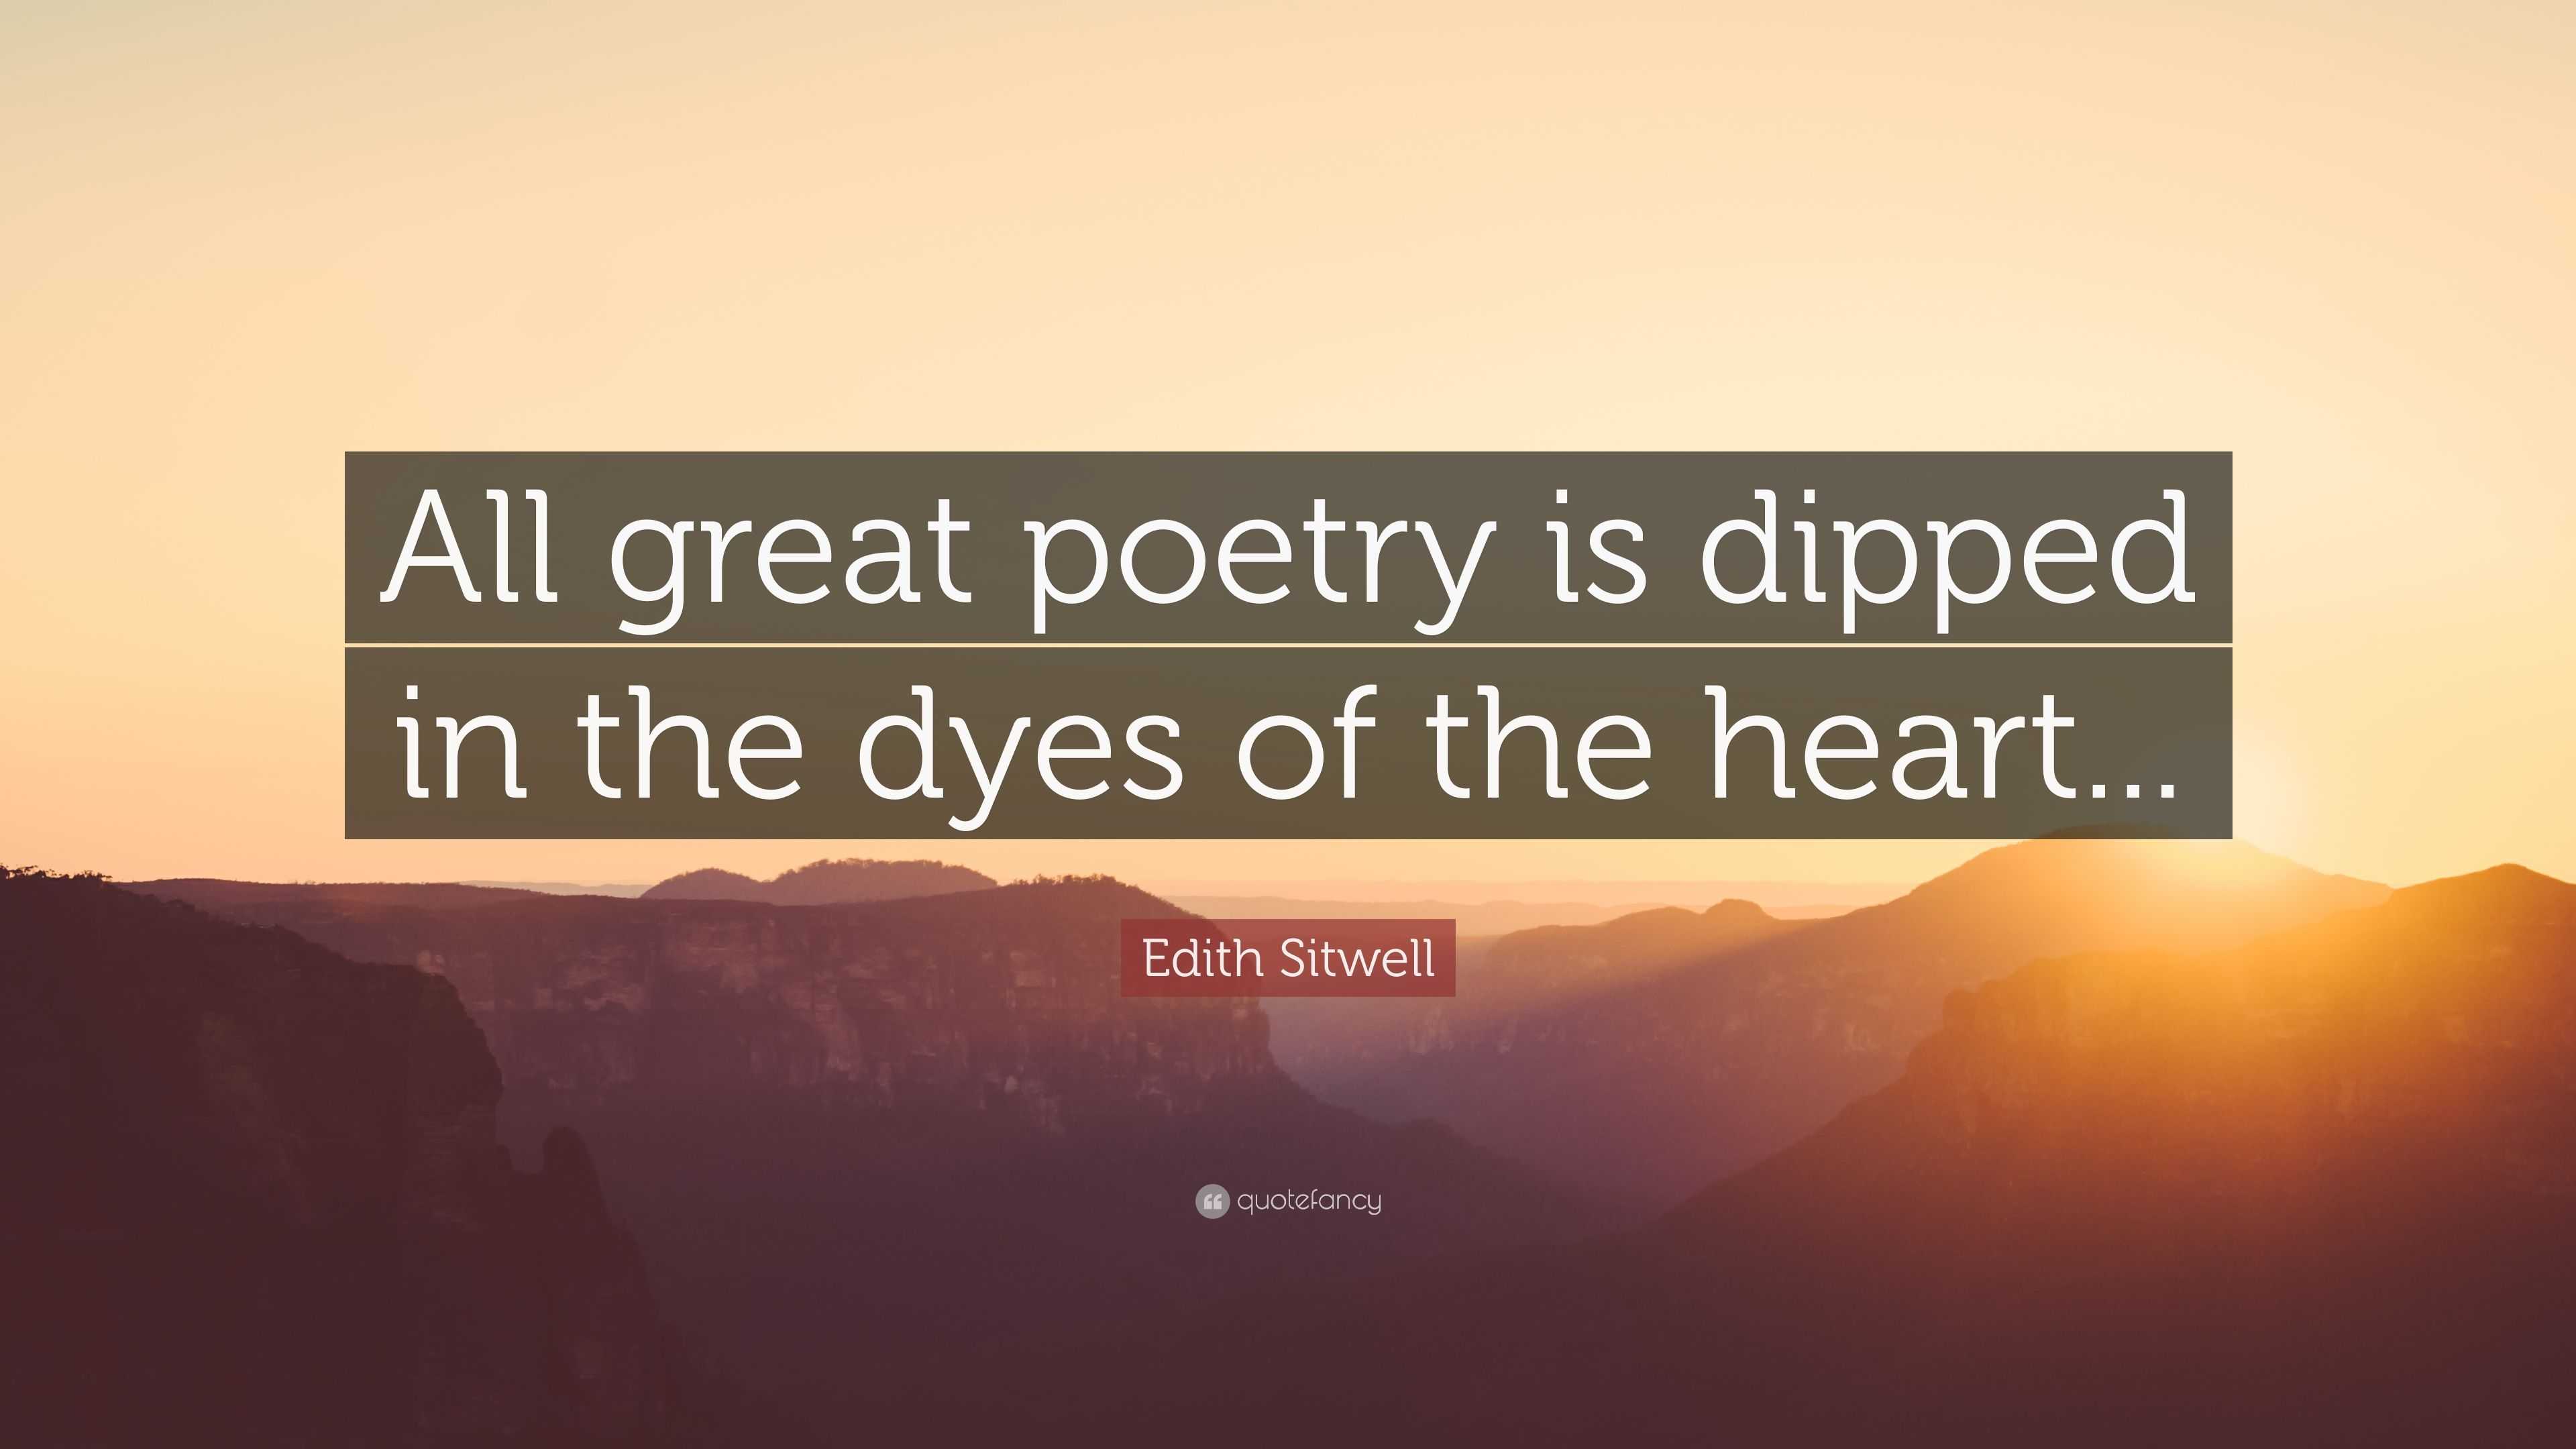 Edith Sitwell Quote: “All great poetry is dipped in the dyes of the